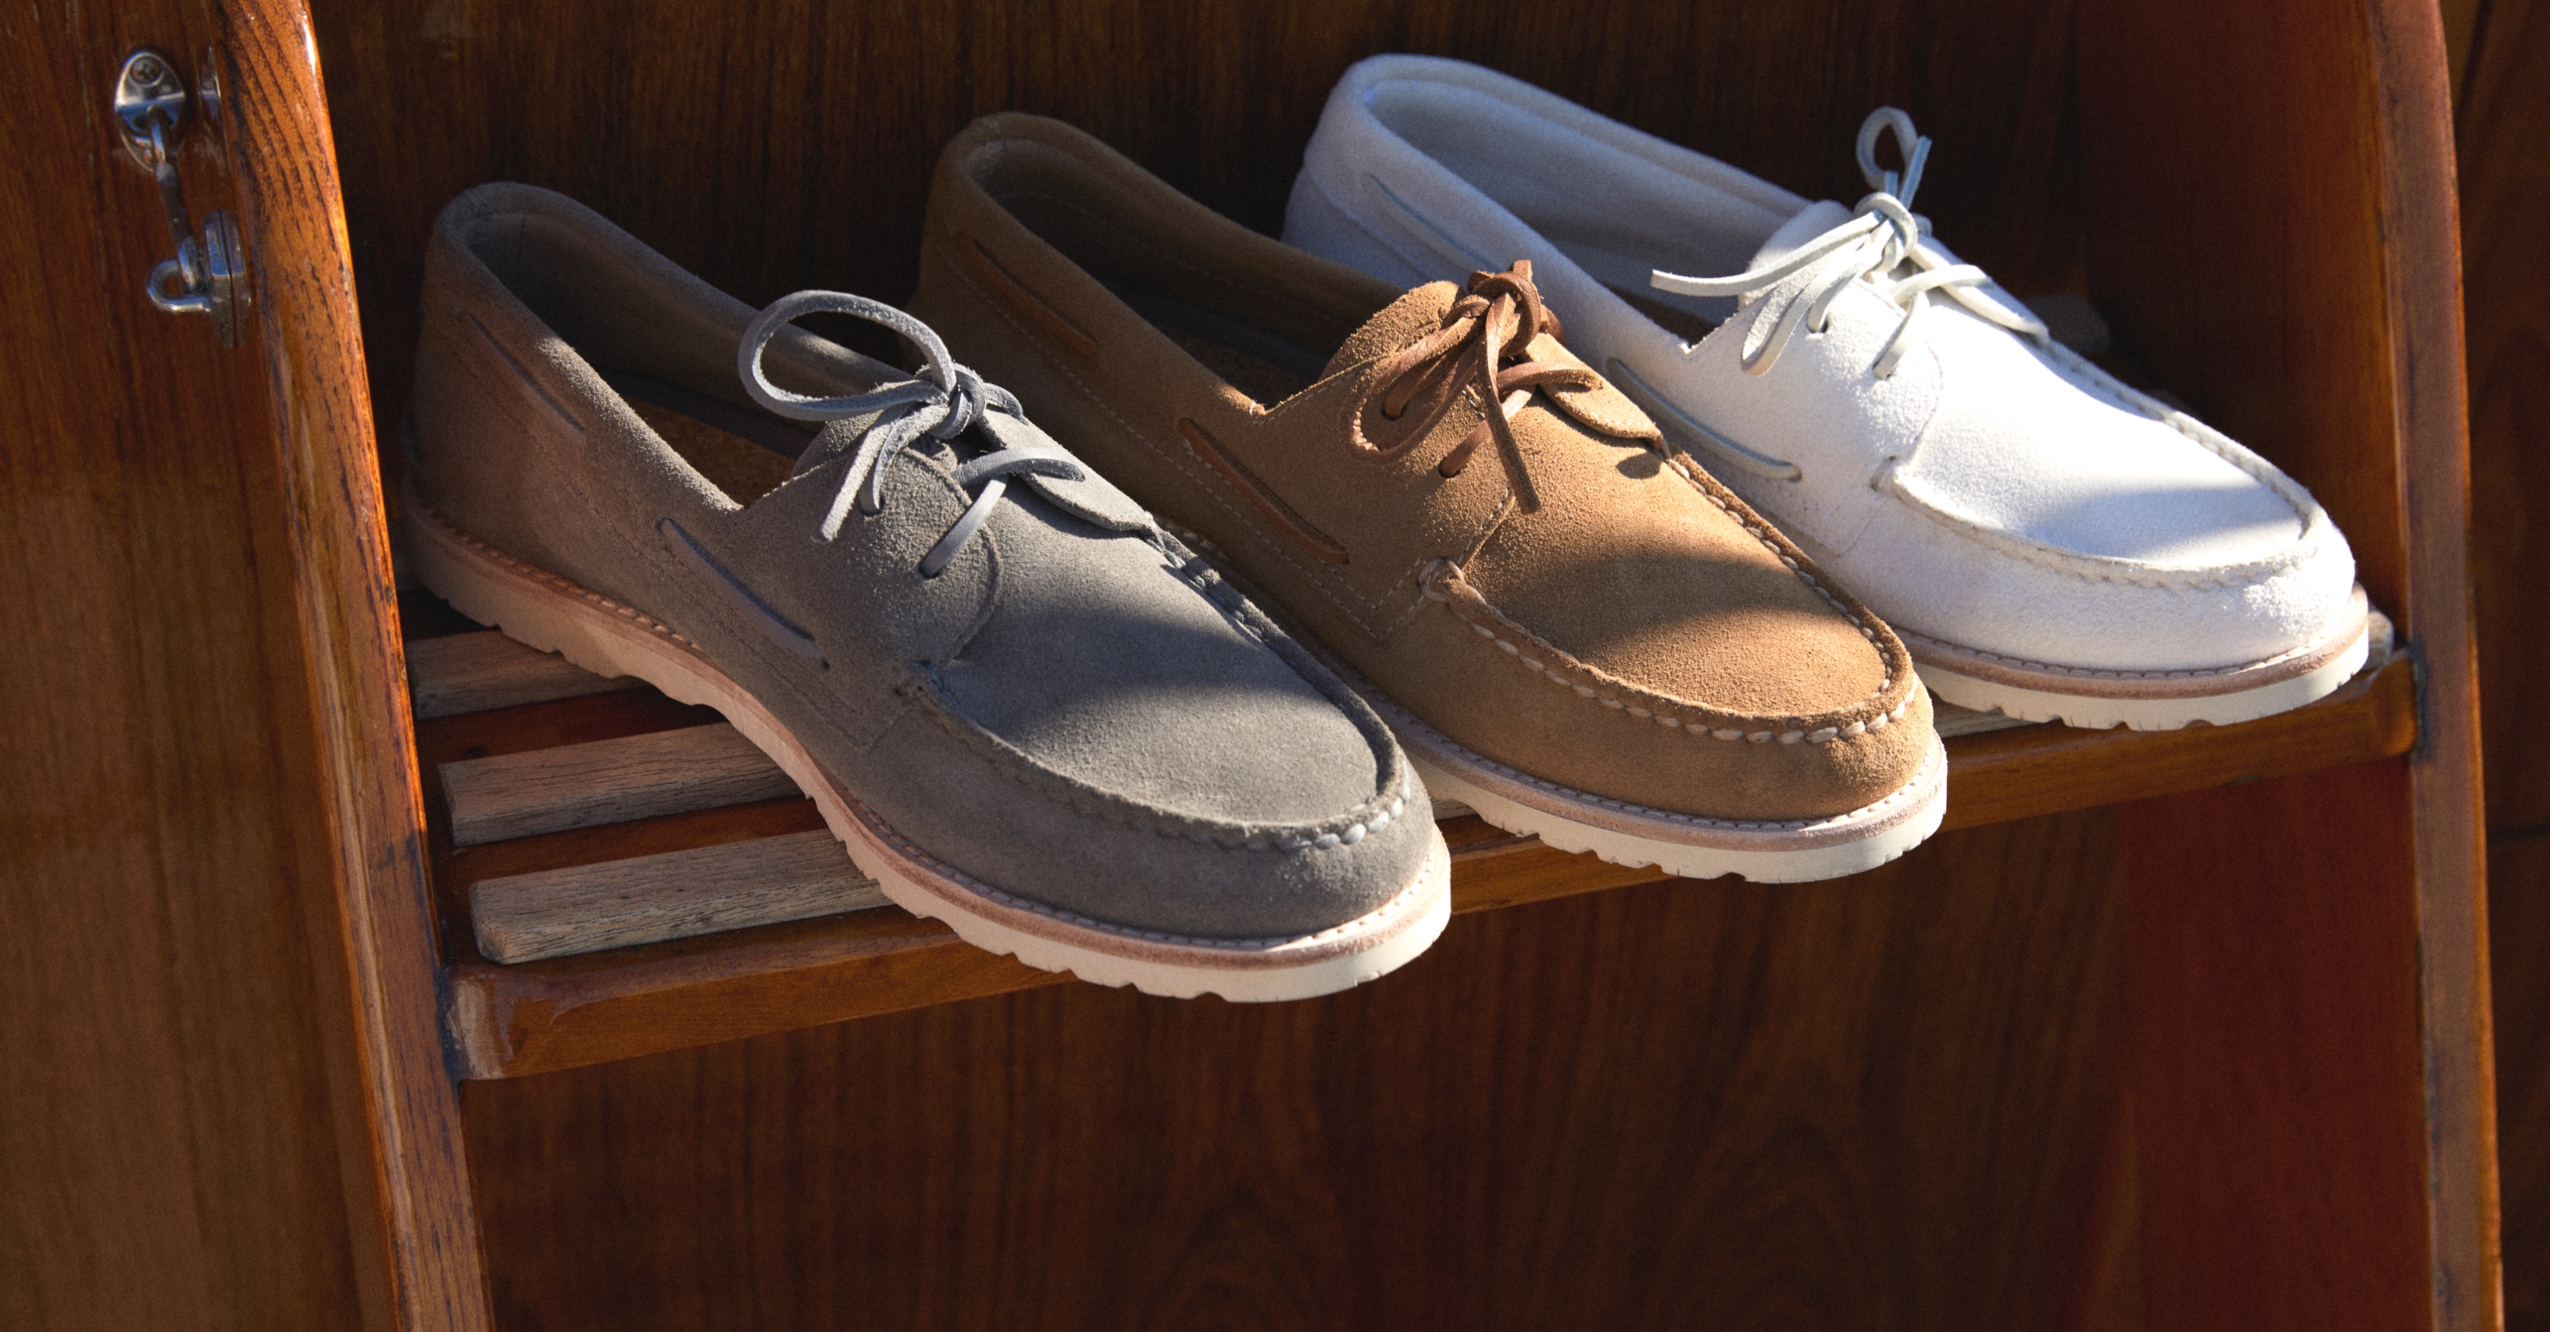 Todd Snyder Just Updated The Iconic Sperry Boat Shoe